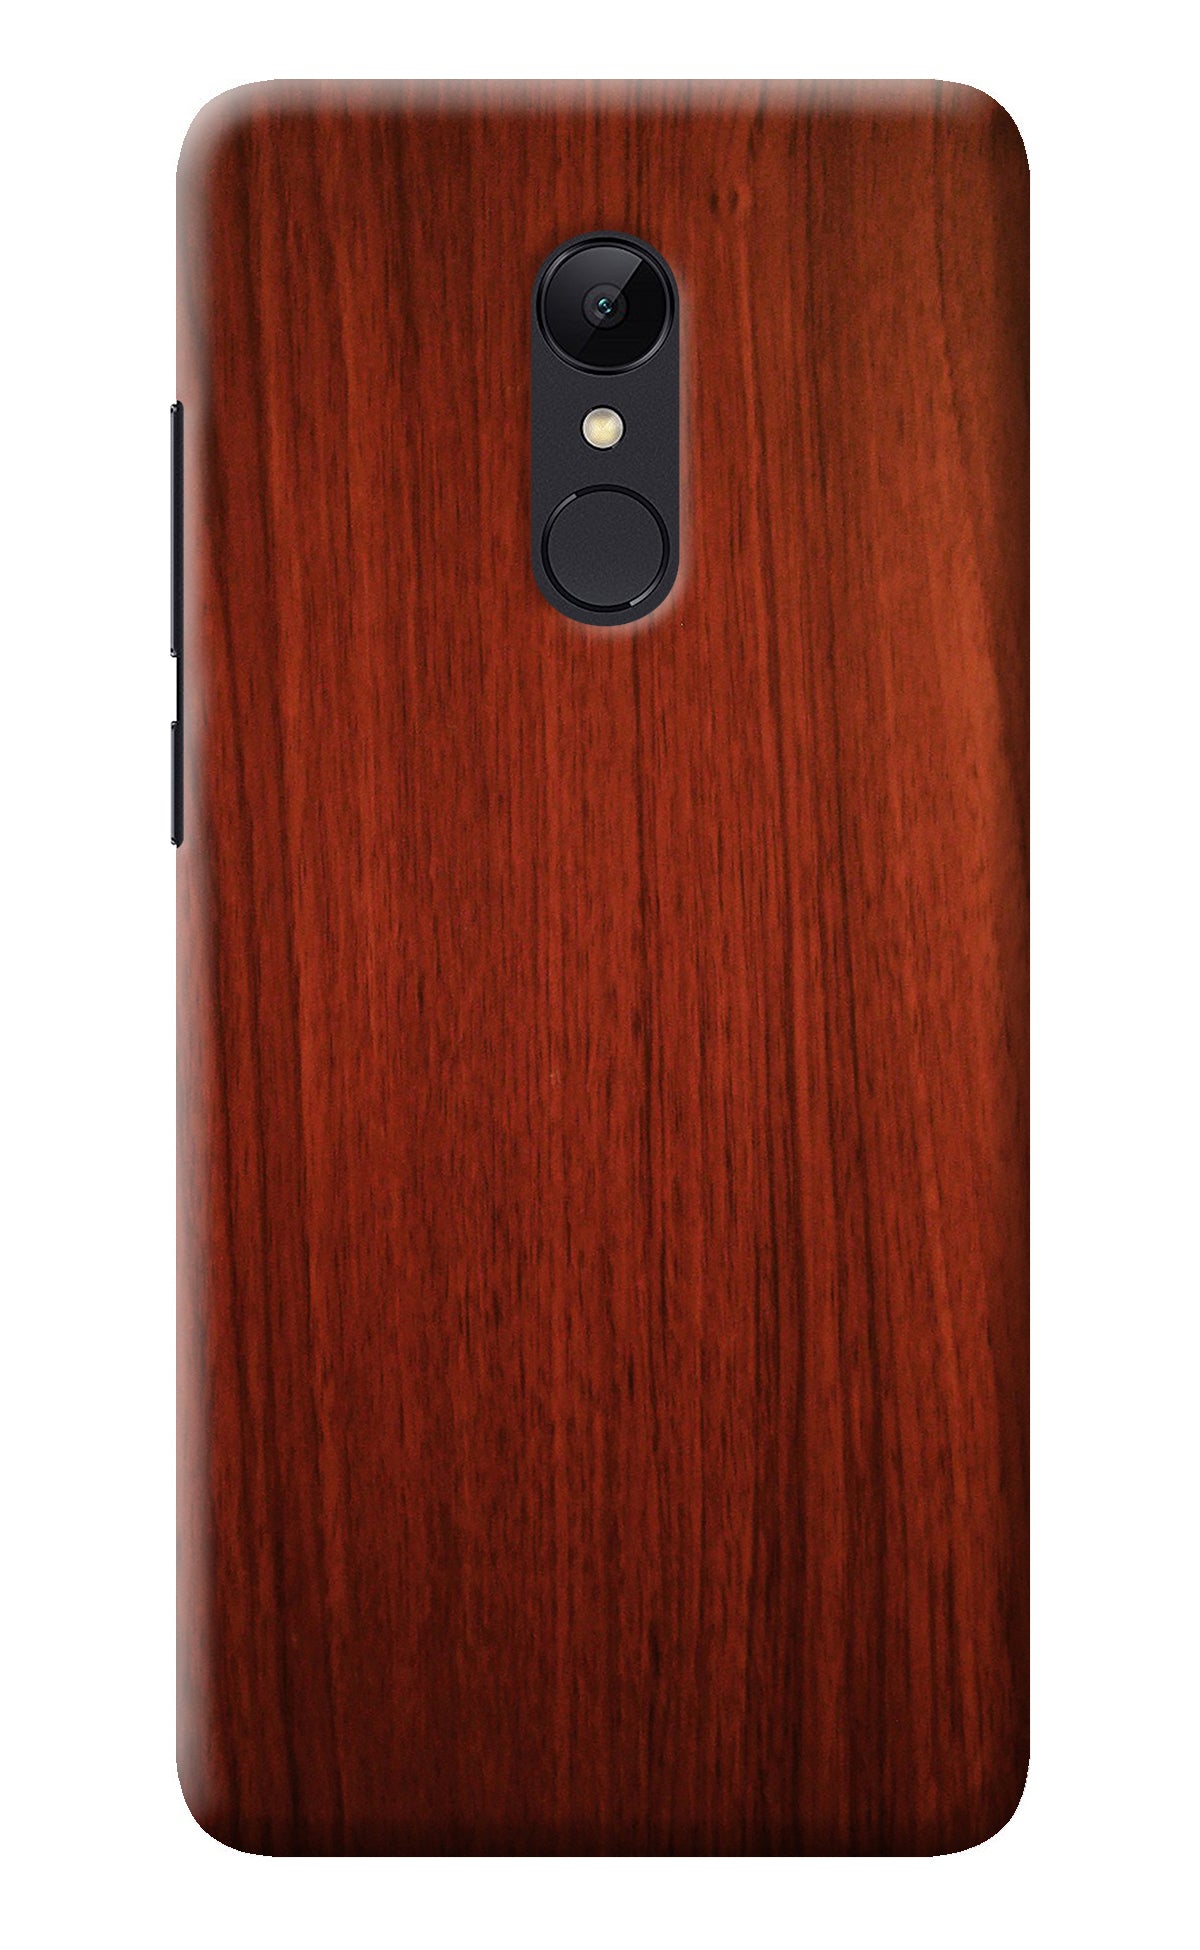 Wooden Plain Pattern Redmi Note 4 Back Cover